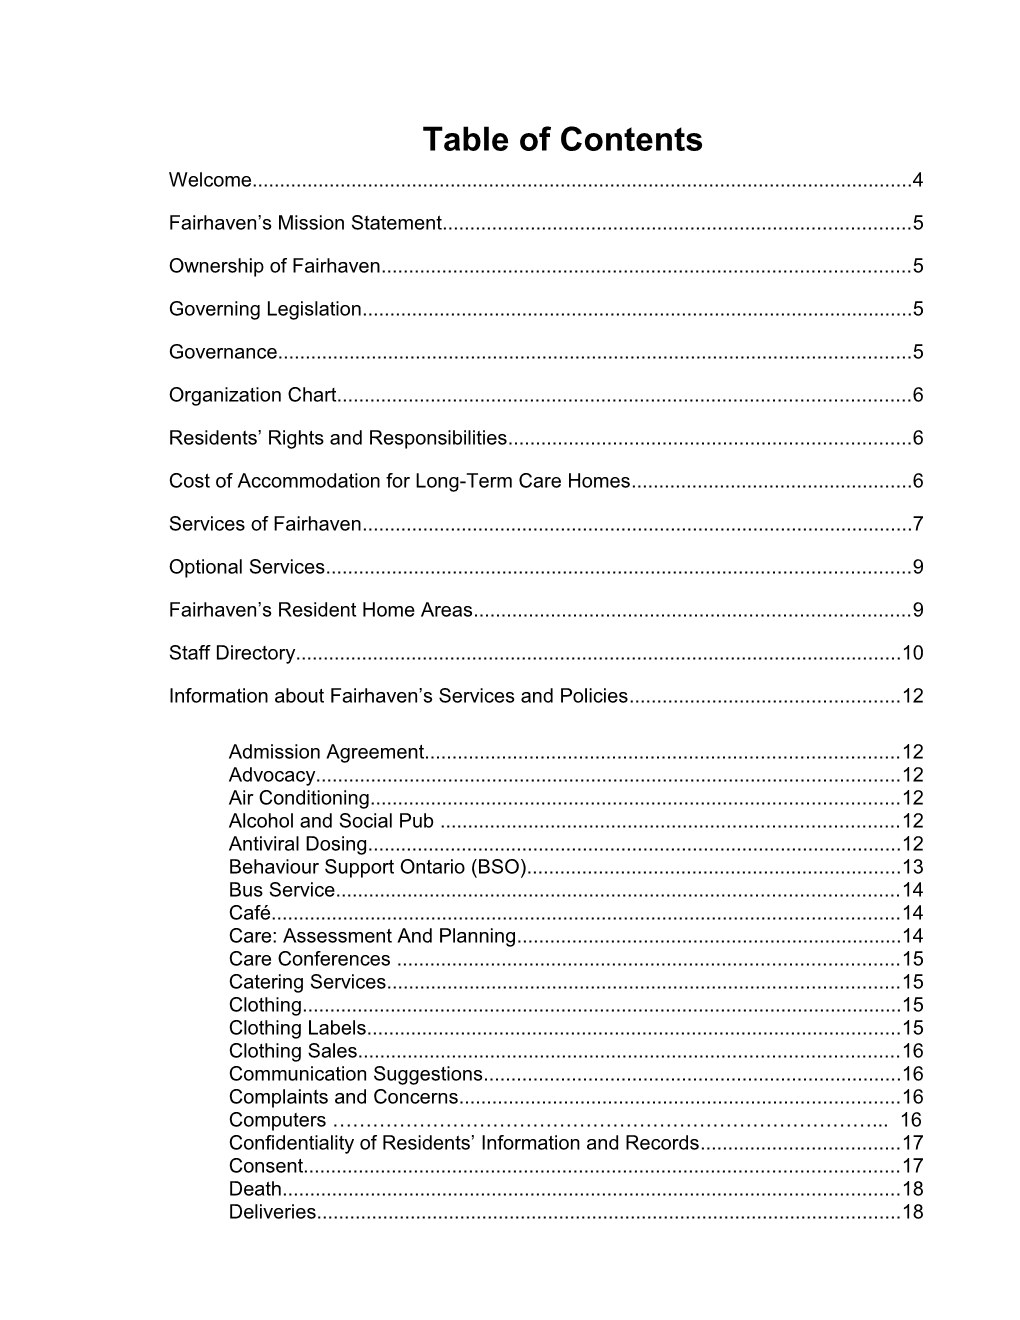 Table of Contents s148